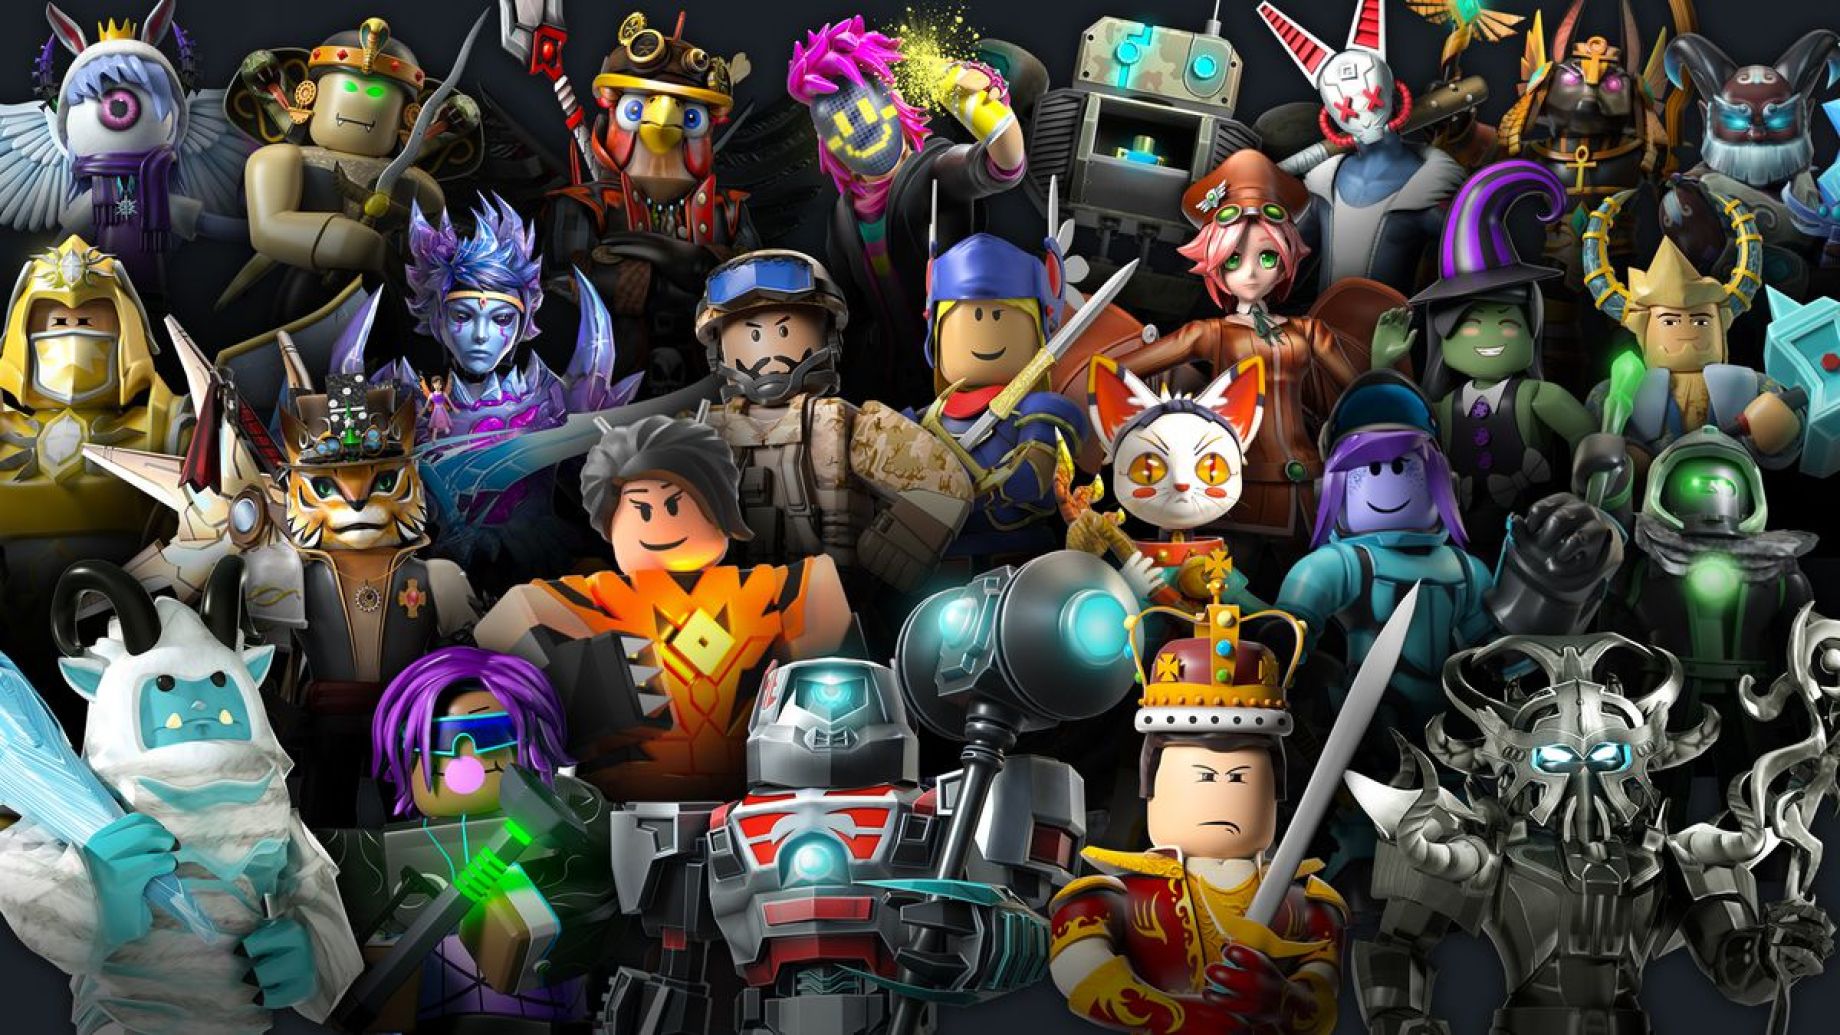 A year after FTC complaint, Roblox will now hide ads for players 13 and  under